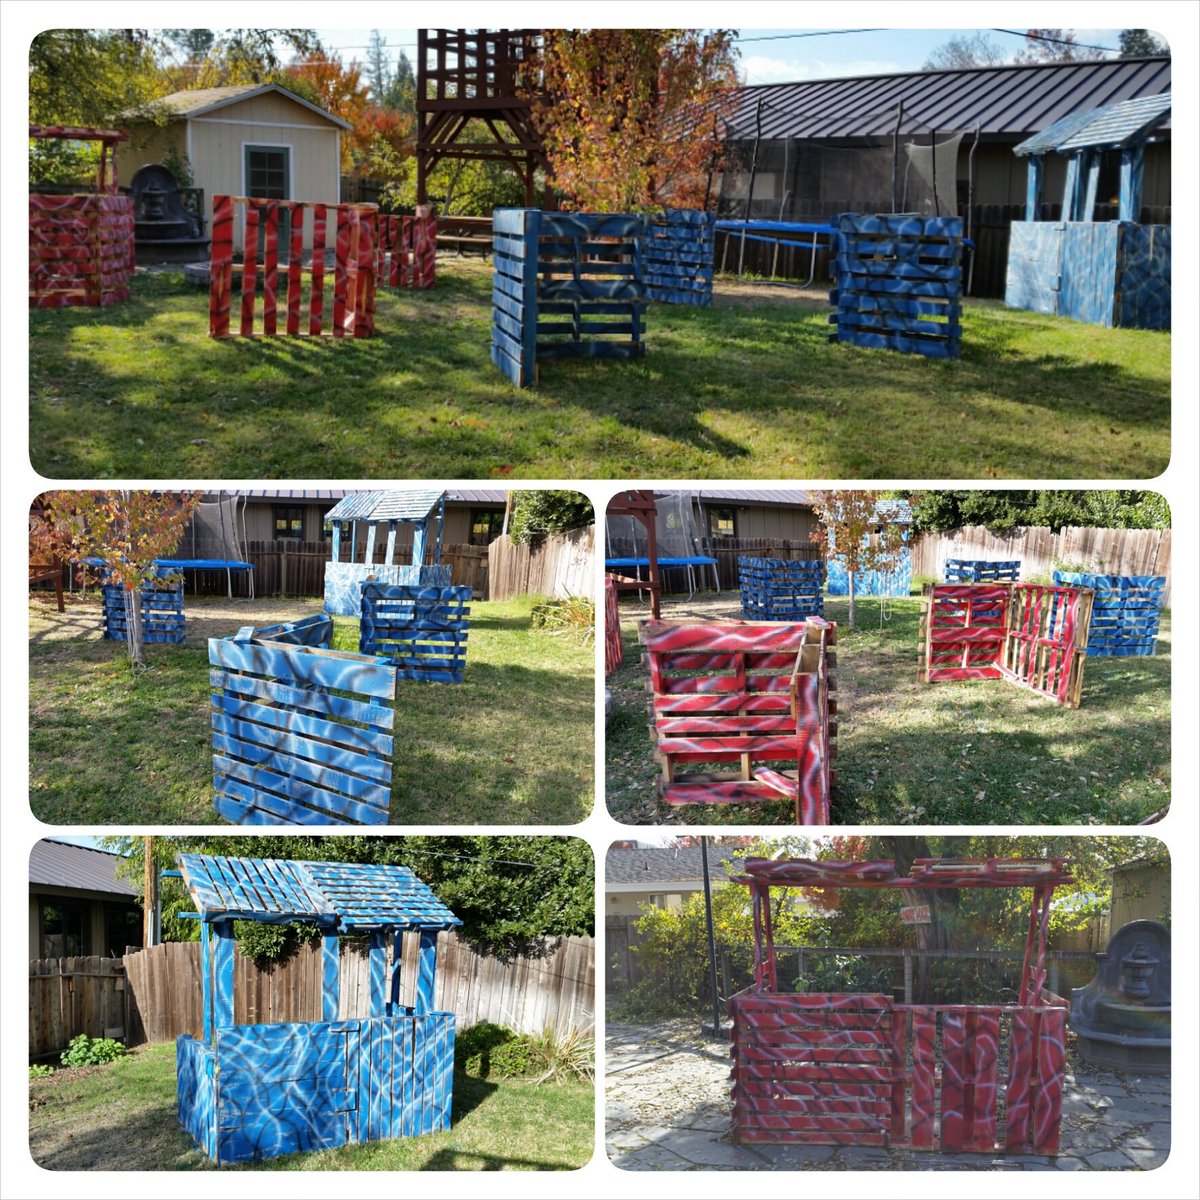 Hotel Nonsens Whirlpool Ryan Lundquist on Twitter: "The backyard nerf battlefield is almost done.  22 pallets. Check. Camouflage paint. Check. #fatherhood #nerf  https://t.co/2Y7P9kJKb0" / Twitter